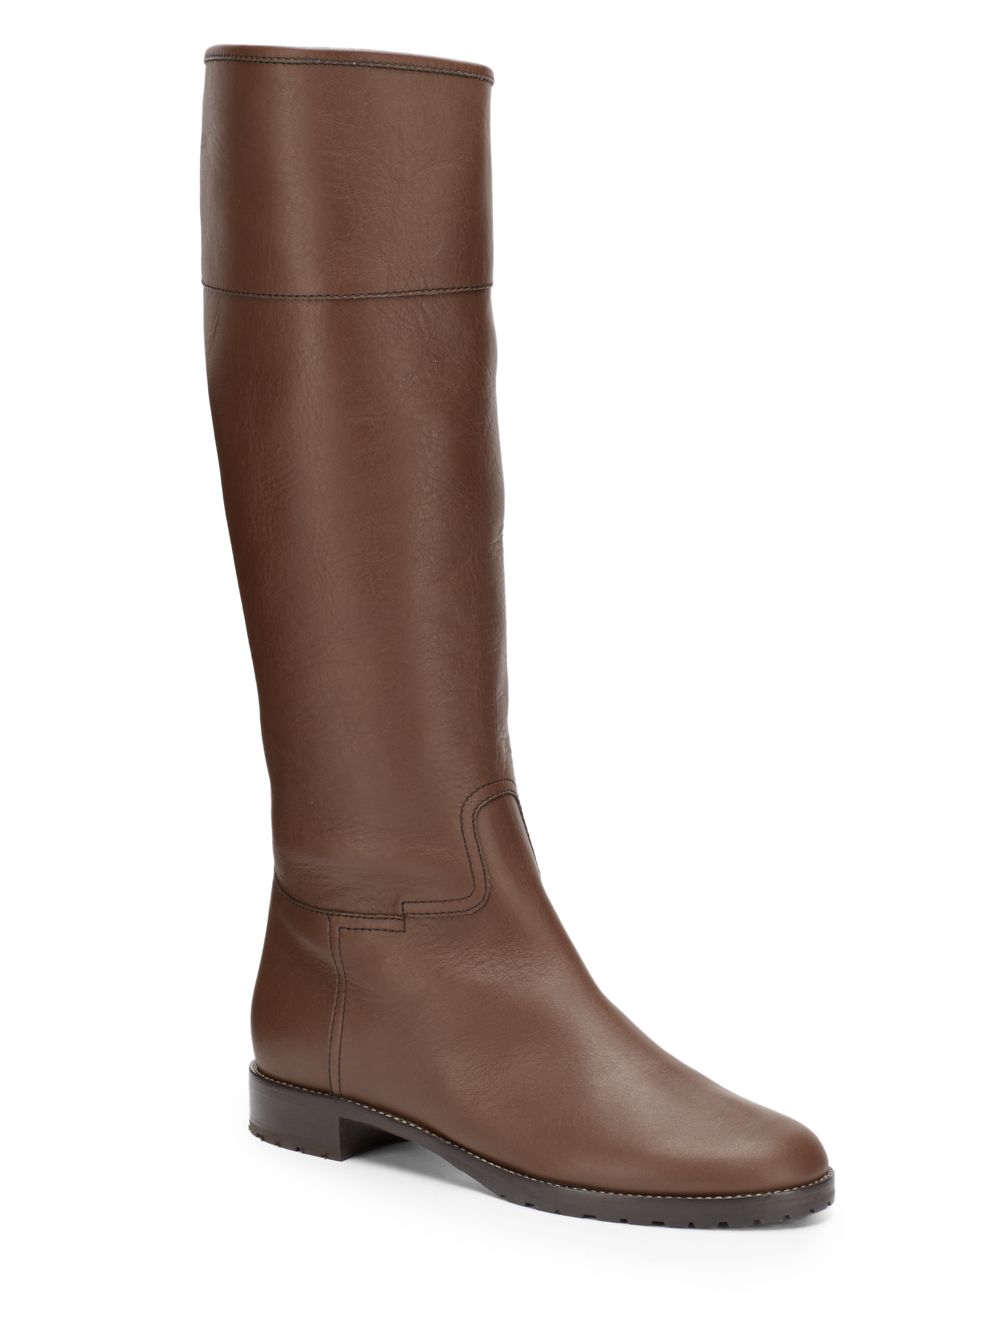 Giuseppe Zanotti Flat Leather Riding Boots in Brown | Lyst